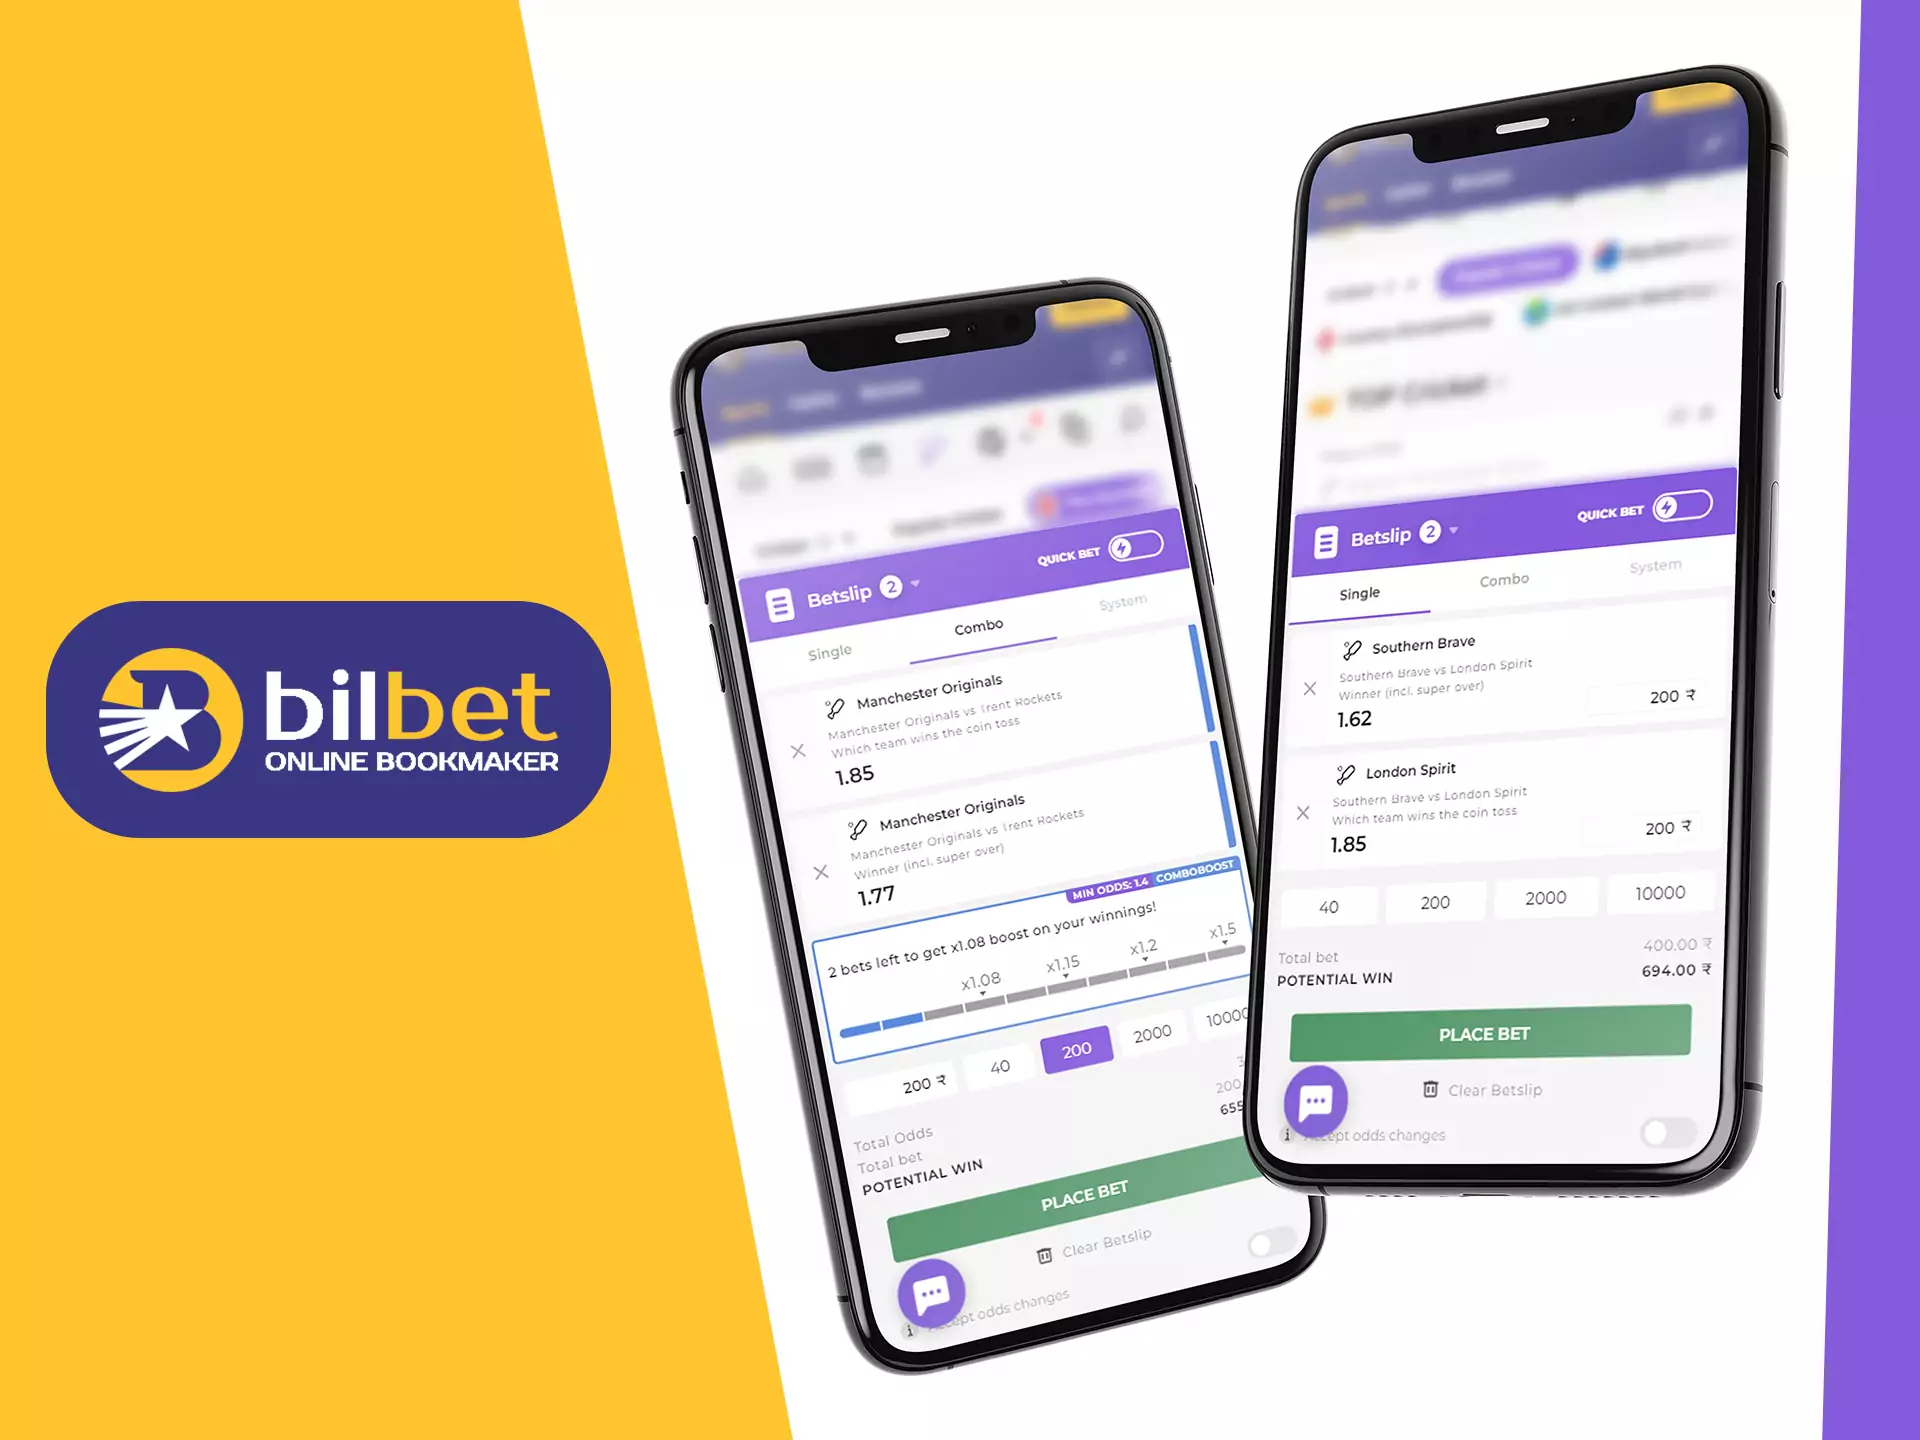 Place bets your way in Bilbet app.